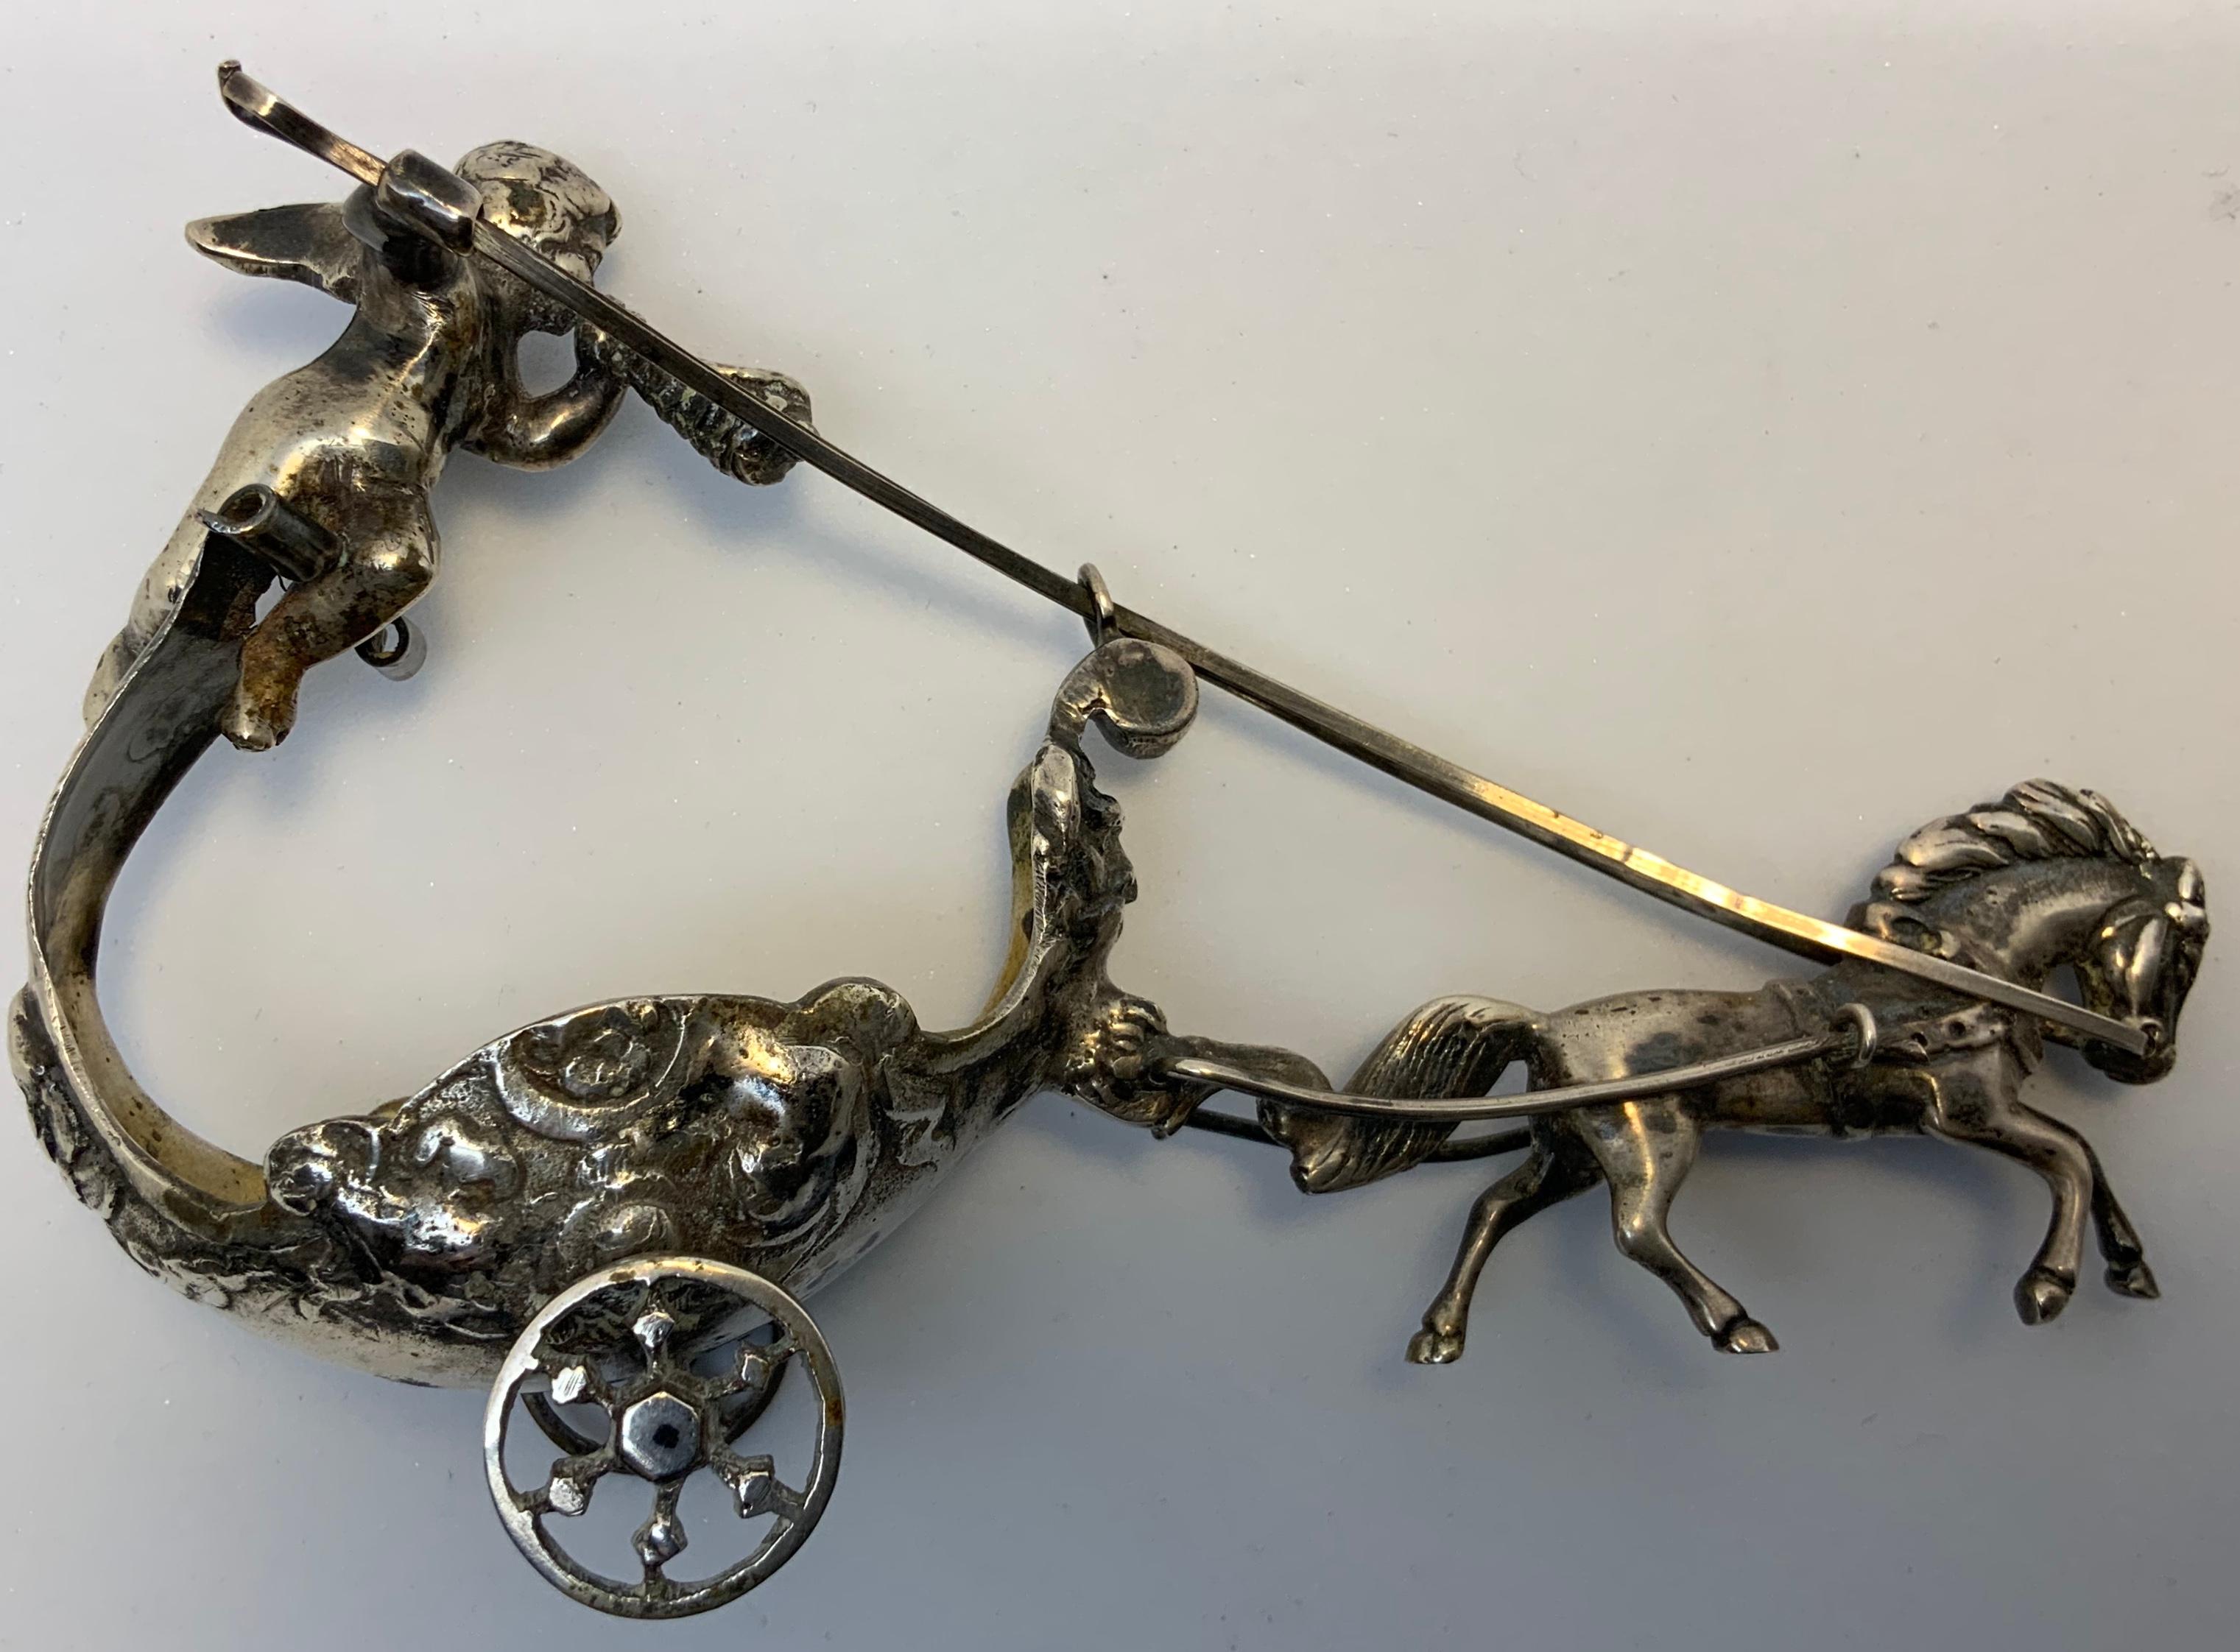 Embossed Pair of Silver Chariots Driven by Winged Cherub Salt Cellars